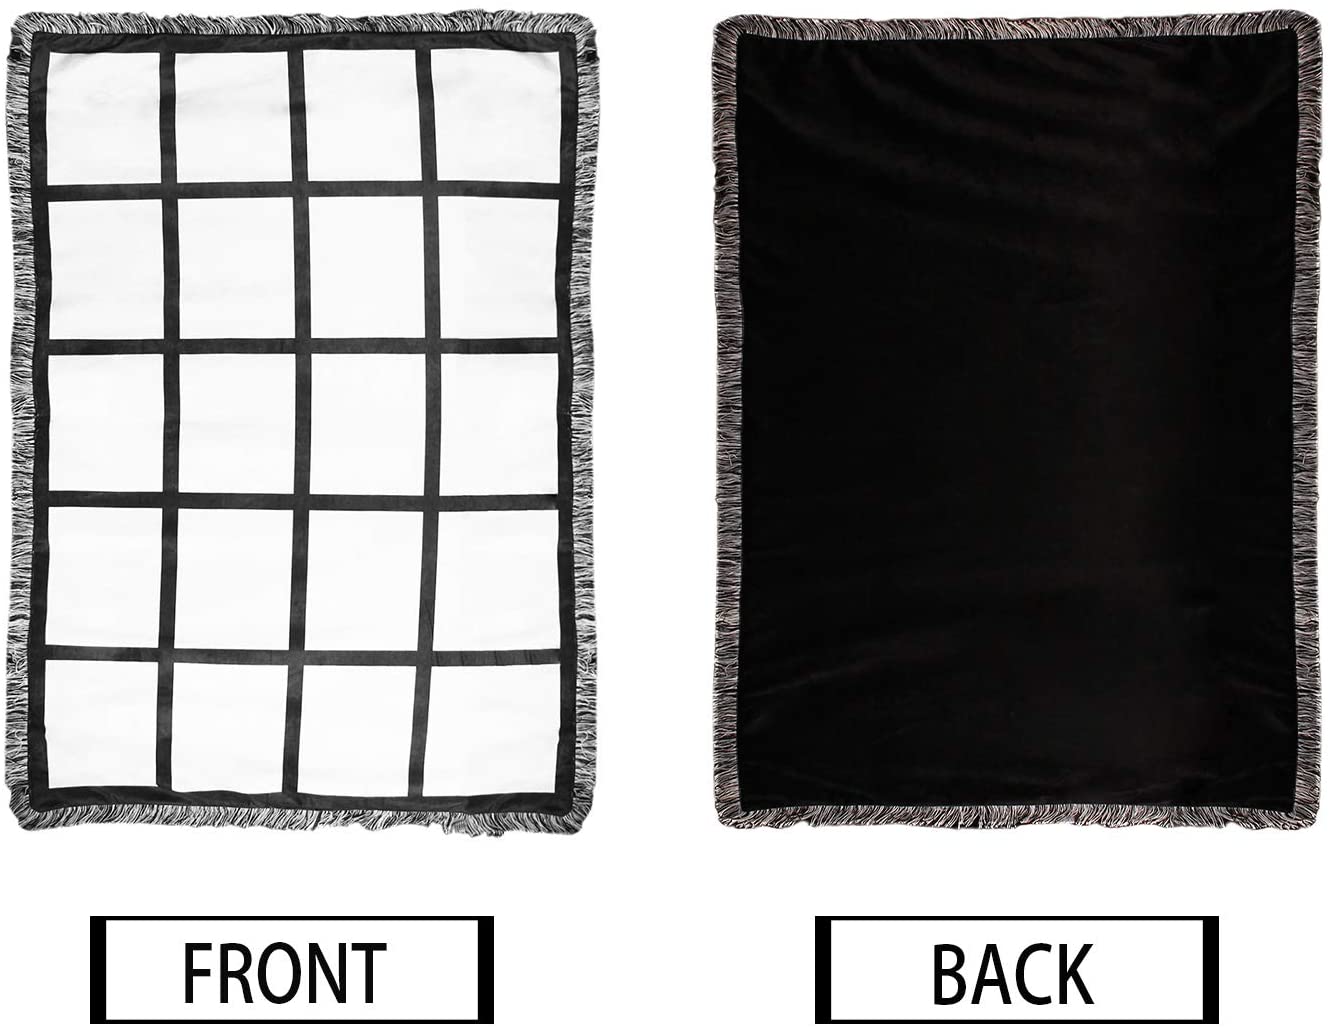 Sublimation Throw Blanket with 9 Panels for Sublimation Printing by Vapor  Apparel - 54 x 38